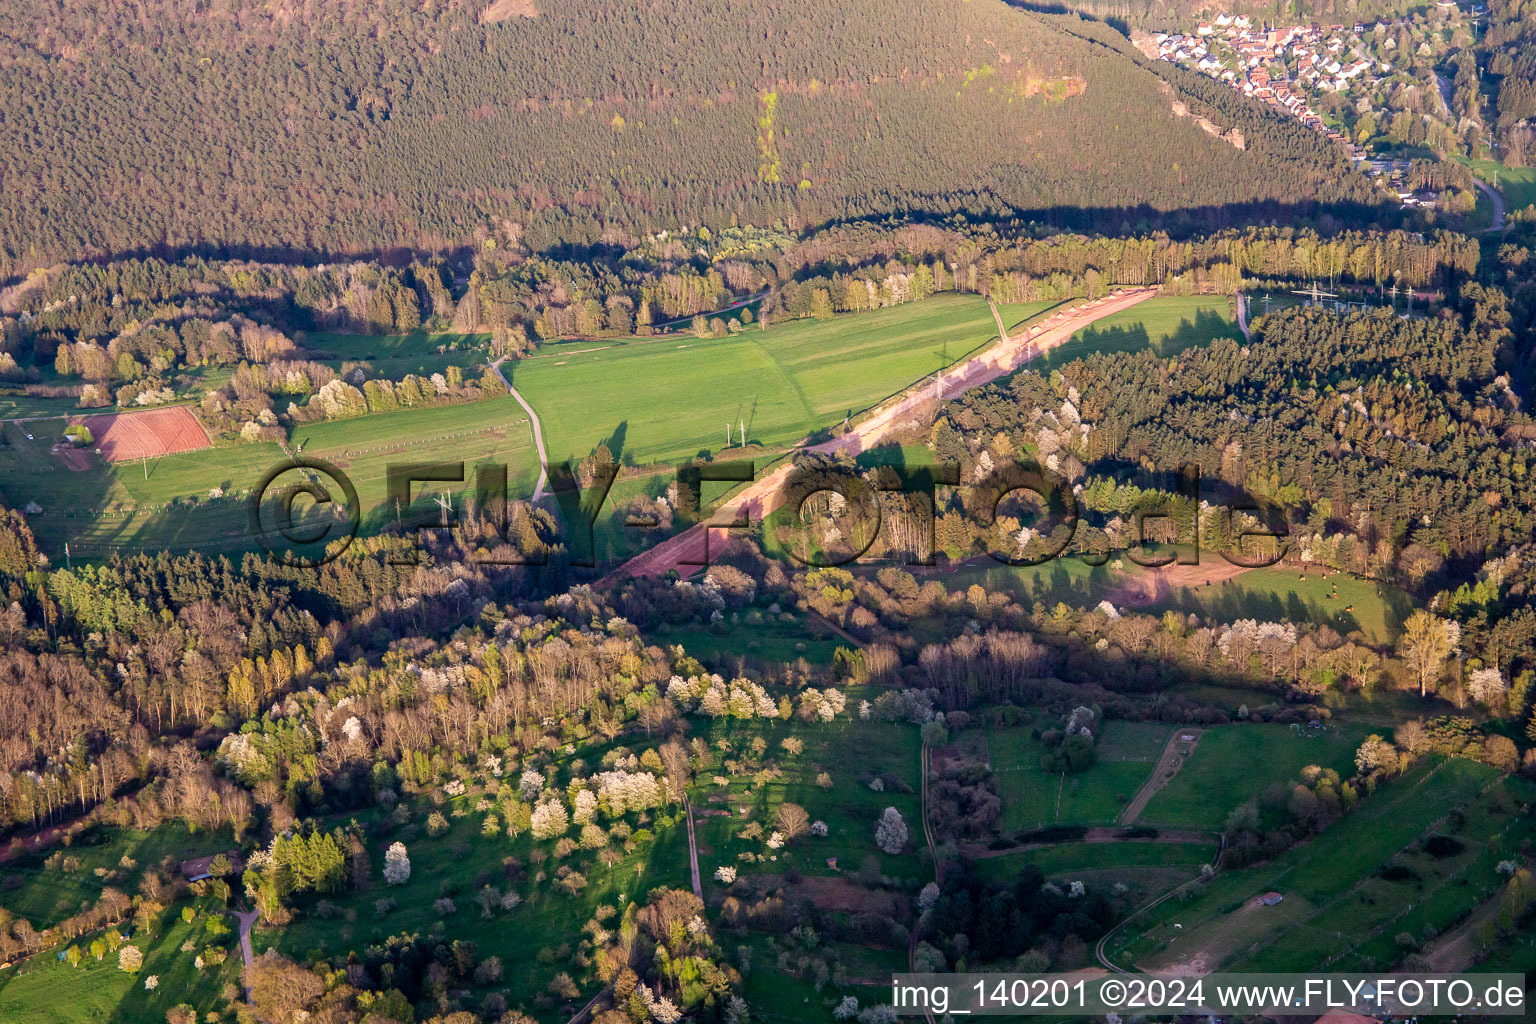 Aerial view of Path through the Palatinate Forest to rebuild the 51 km section of the Trans-Europe Natural Gas Pipeline (TENP-III from the Netherlands to Switzerland) between Mittelbrunn and Klingenmünster in Spirkelbach in the state Rhineland-Palatinate, Germany